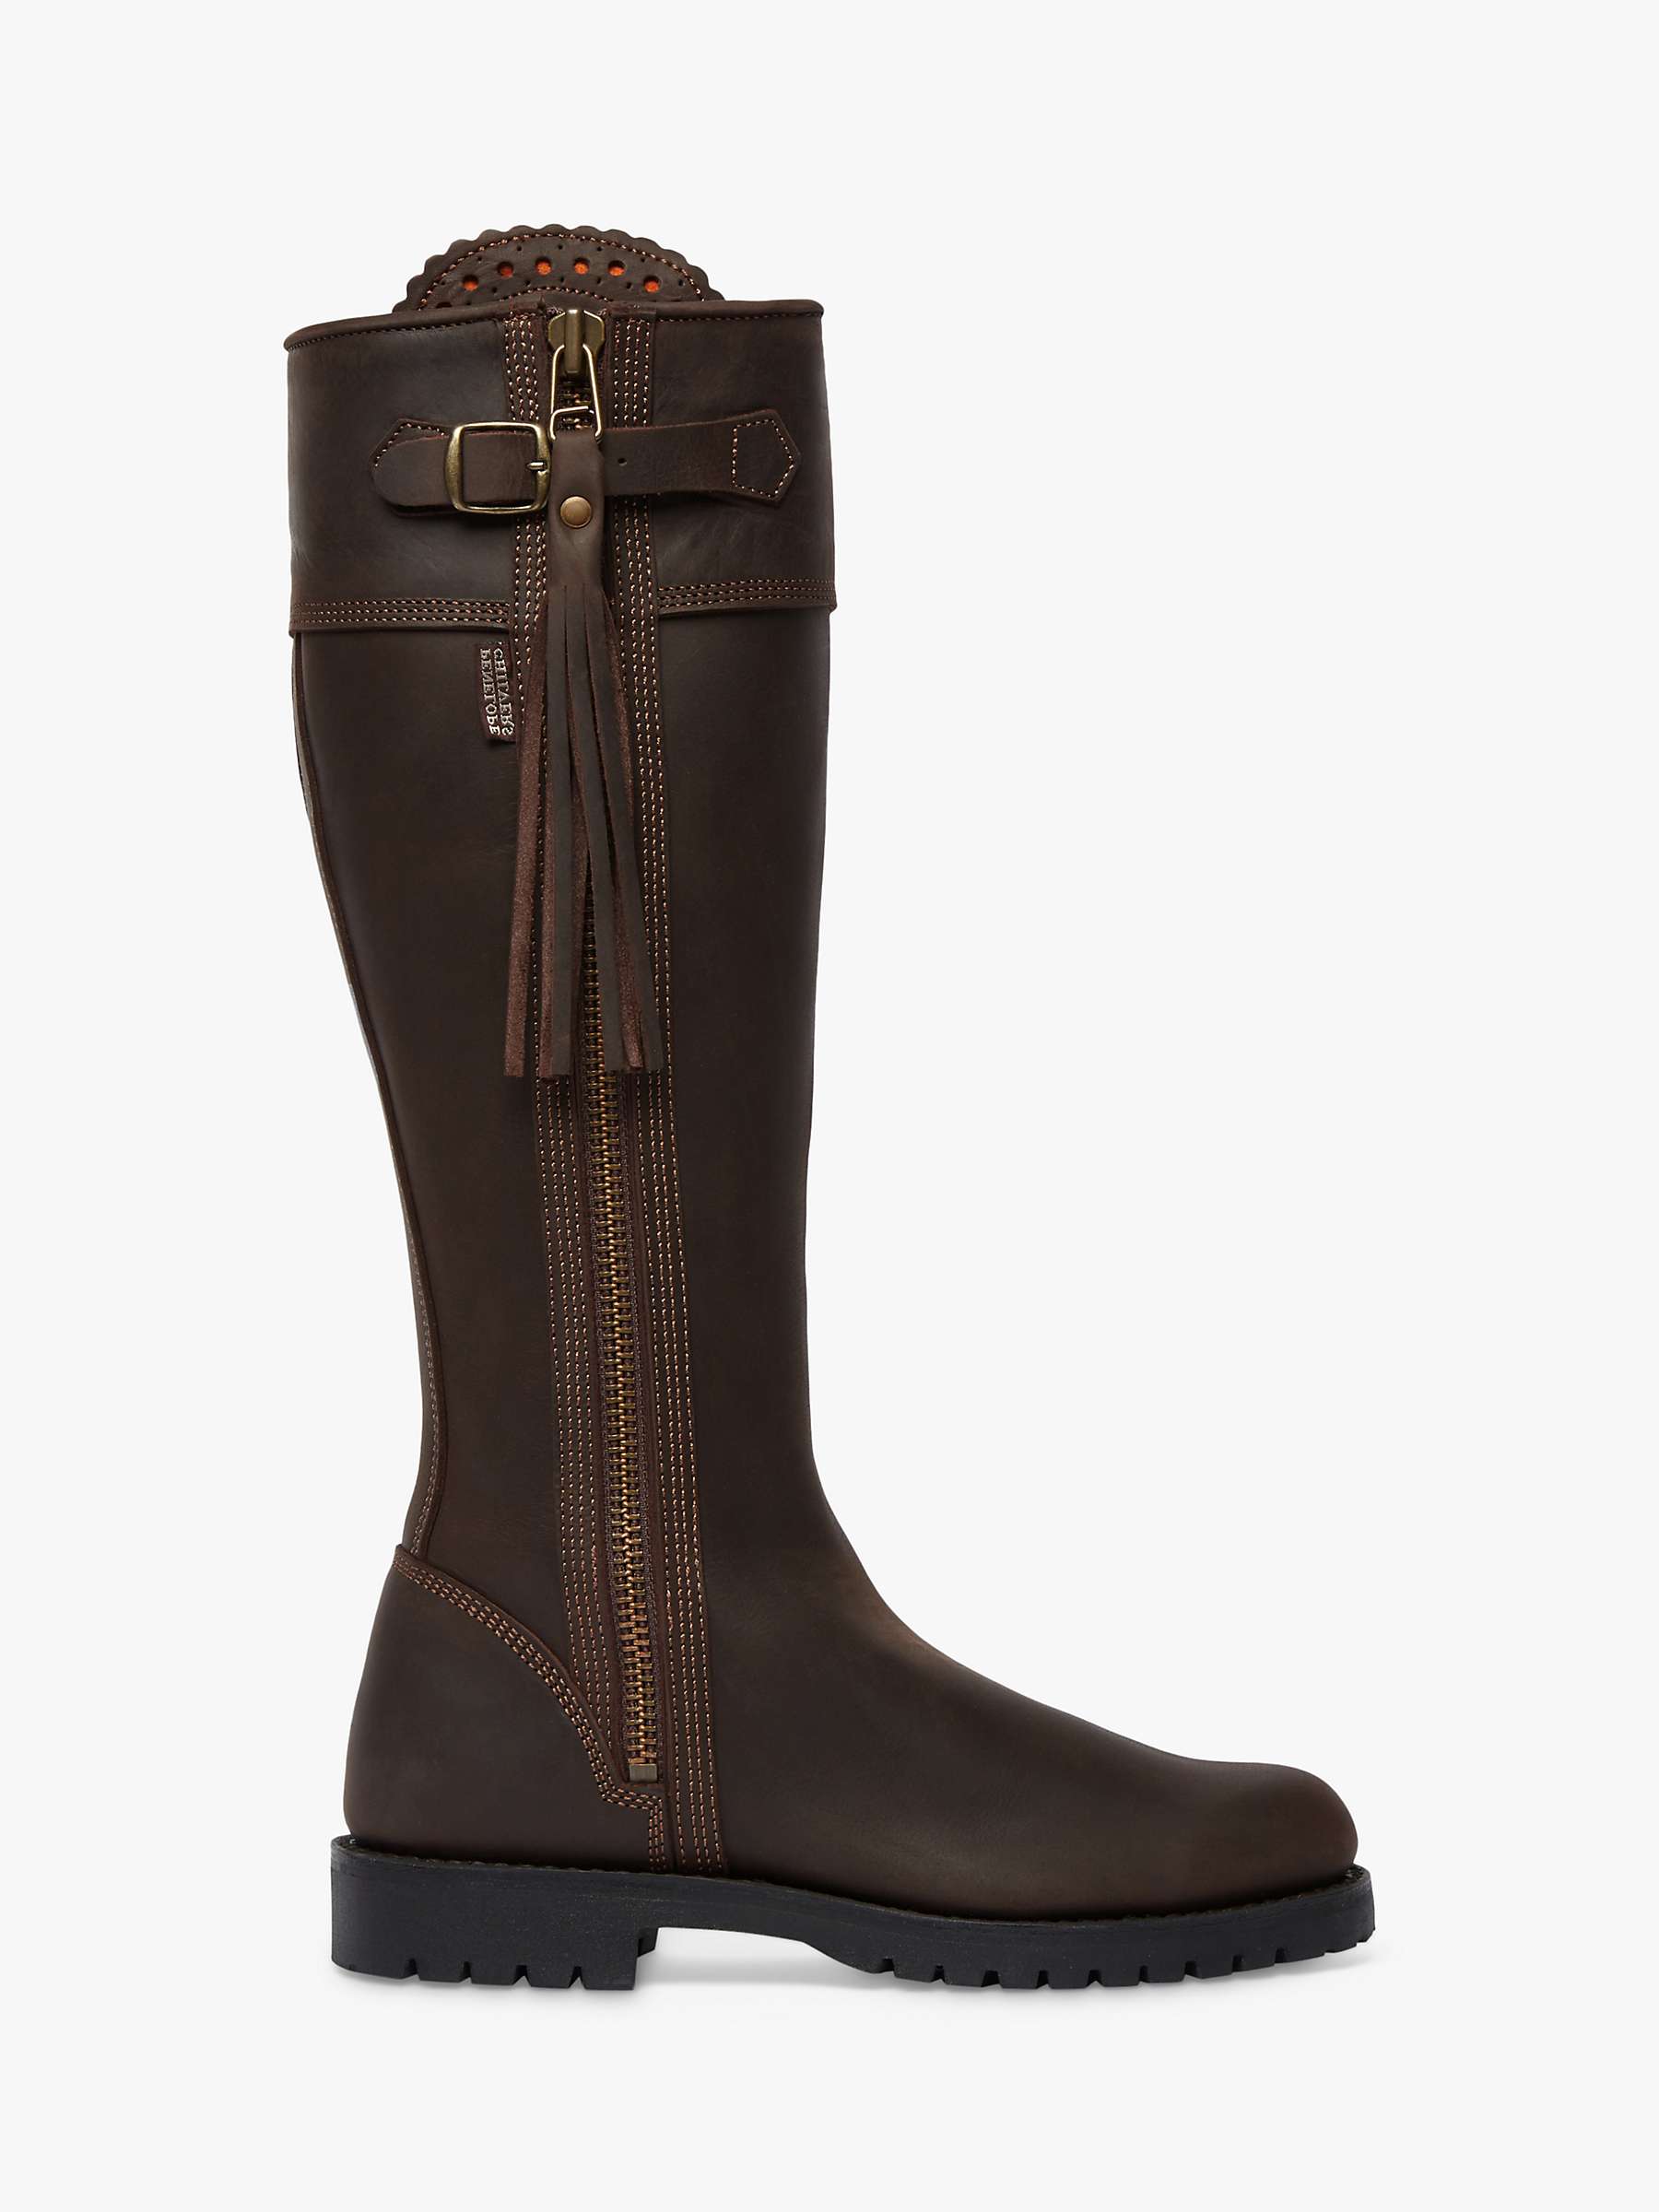 Buy Penelope Chilvers Stand Tassel Knee Boots, Conker Online at johnlewis.com